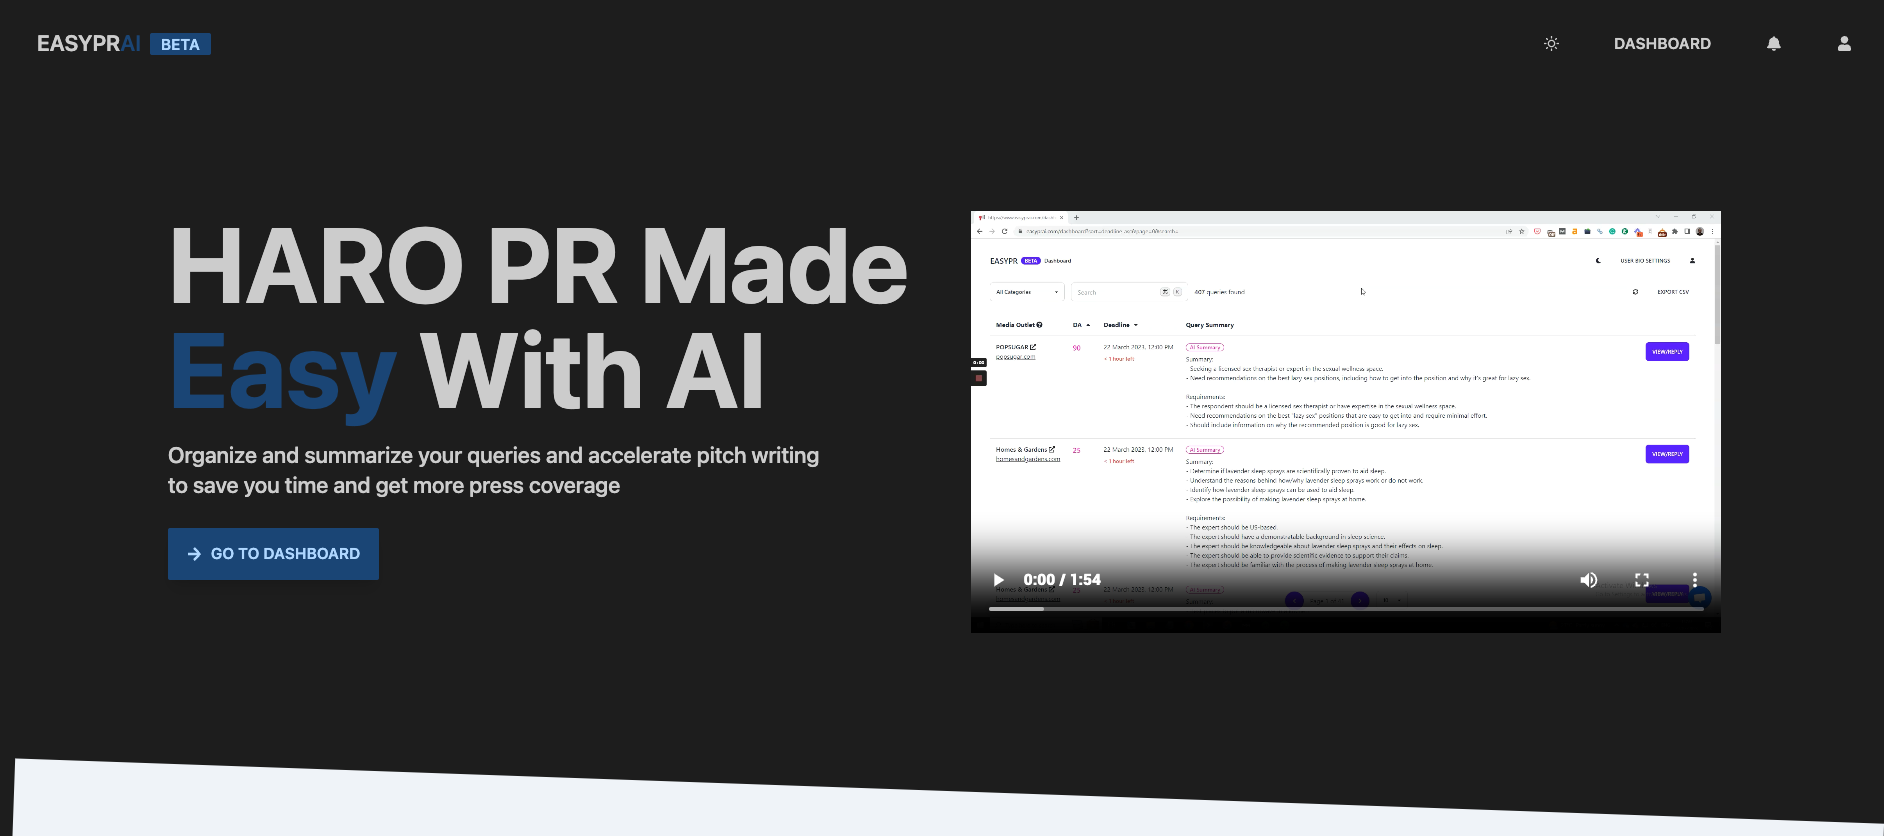 EasyPR AI - A platform to automate HARO pitches